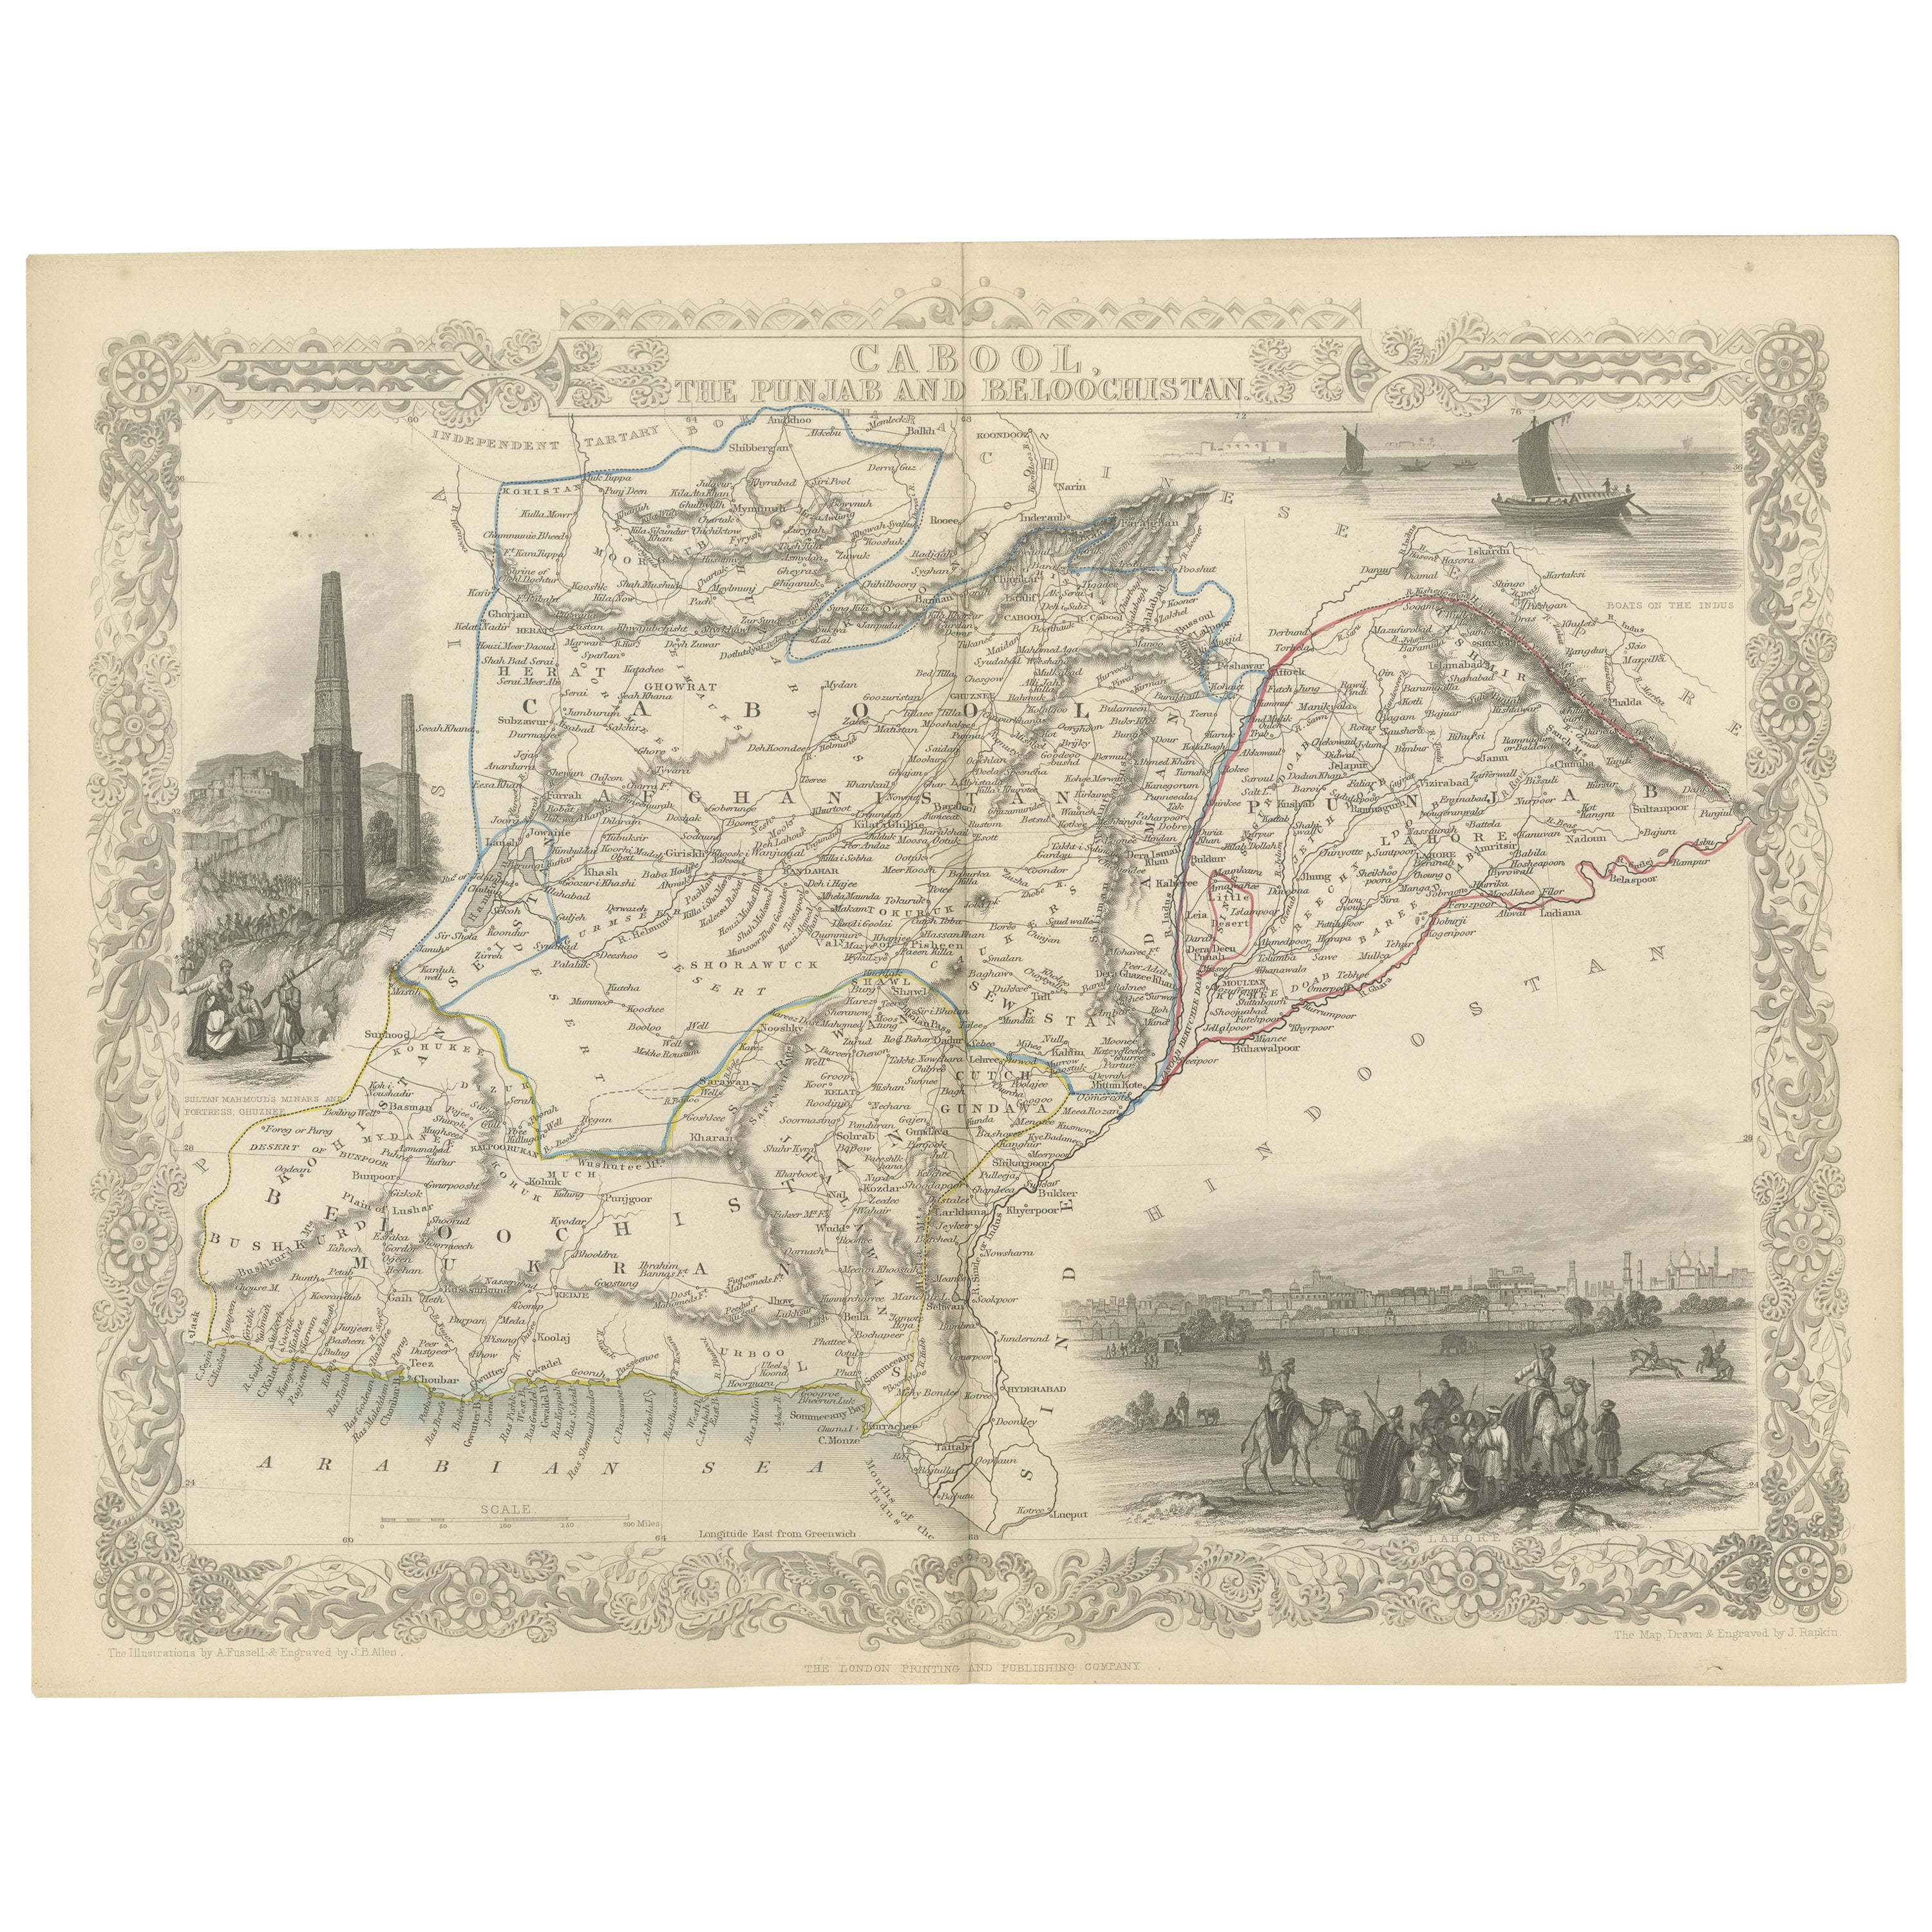 An Illustrated Map of Kabul, Punjab, and Baluchistan by Tallis, 1851